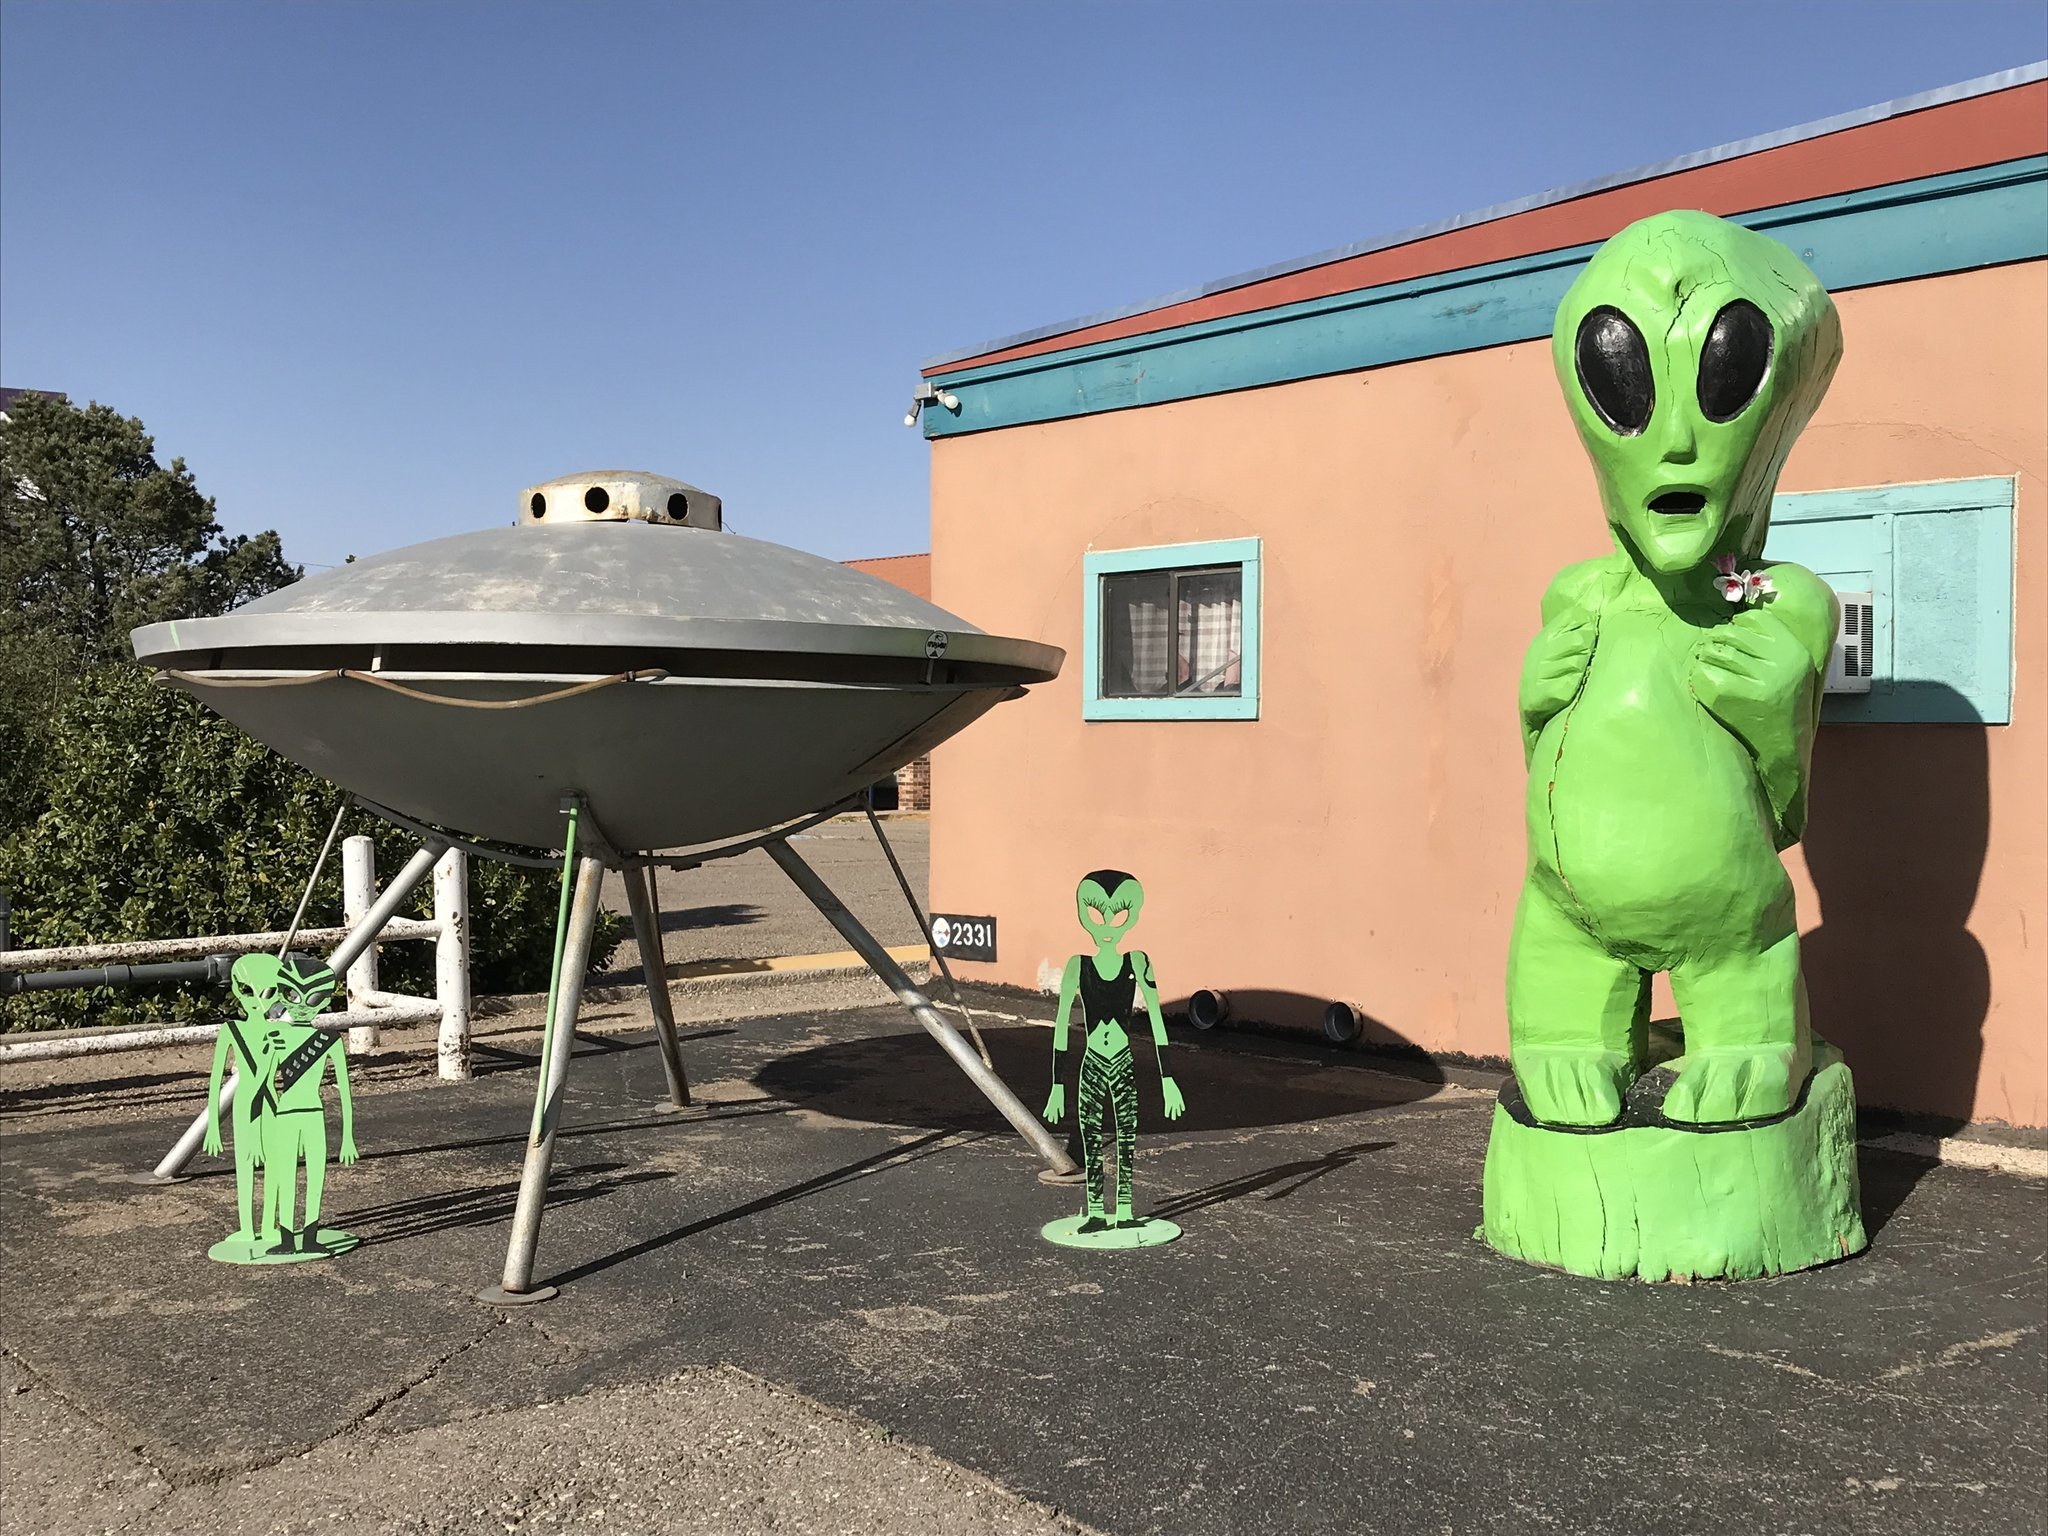 Aliens large and small populate Roswell, N.M.